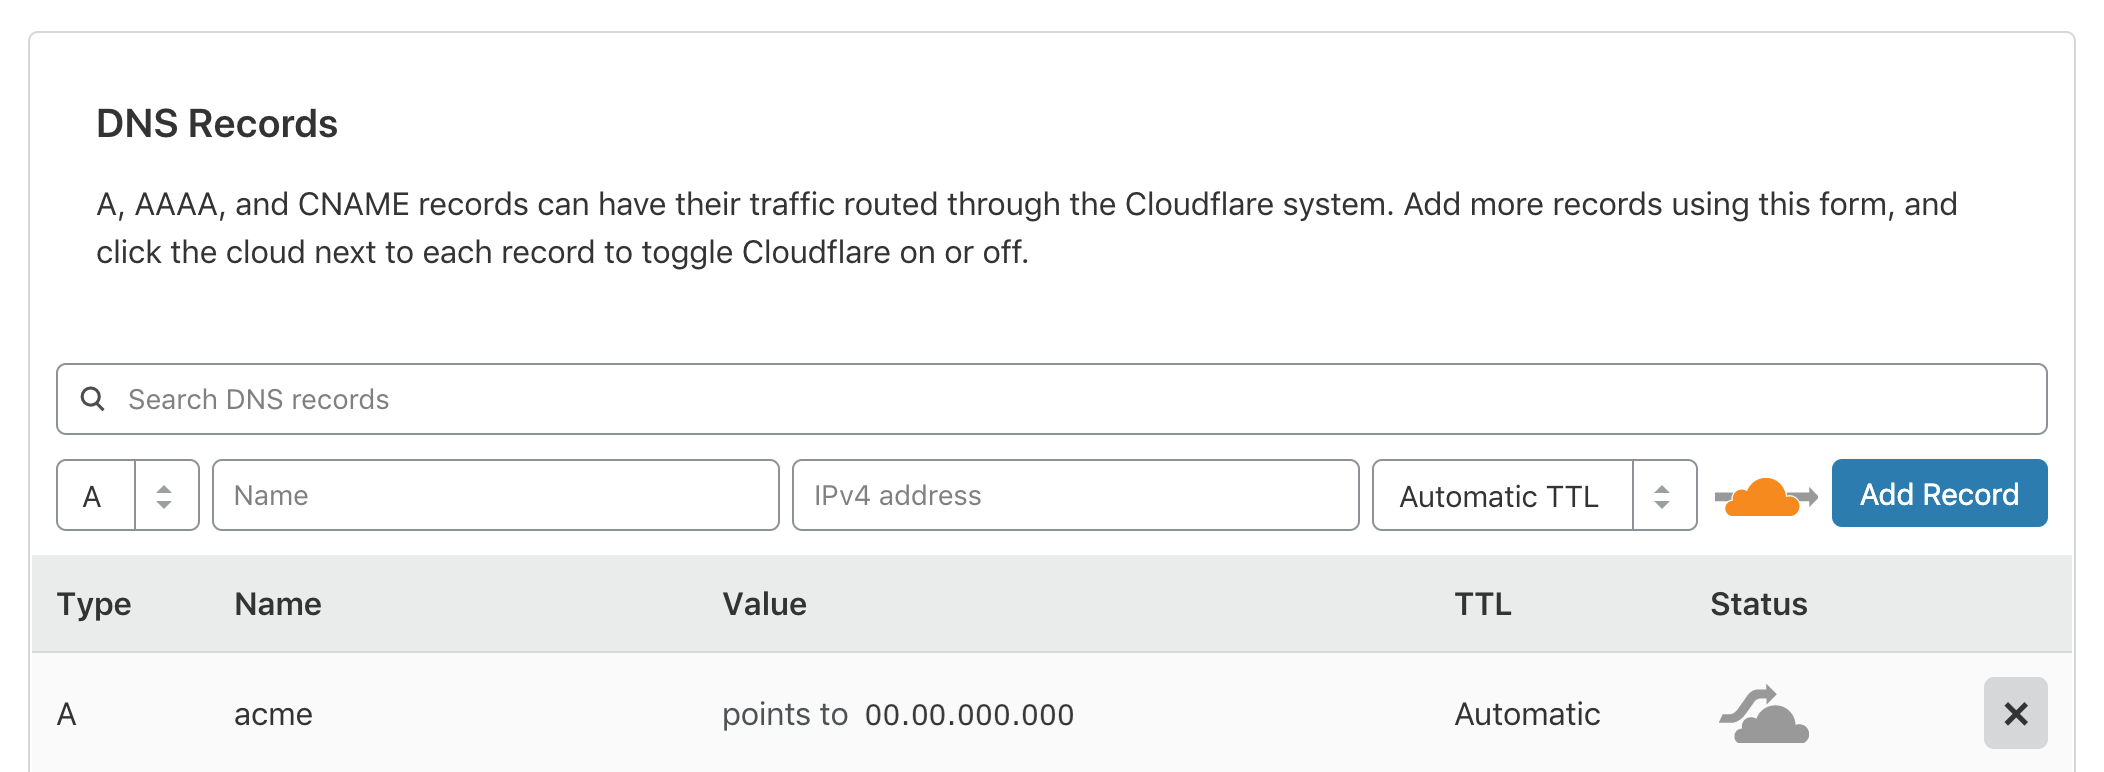 Figure 2: This example uses Cloudflare as a domain name registrar to create DNS records.